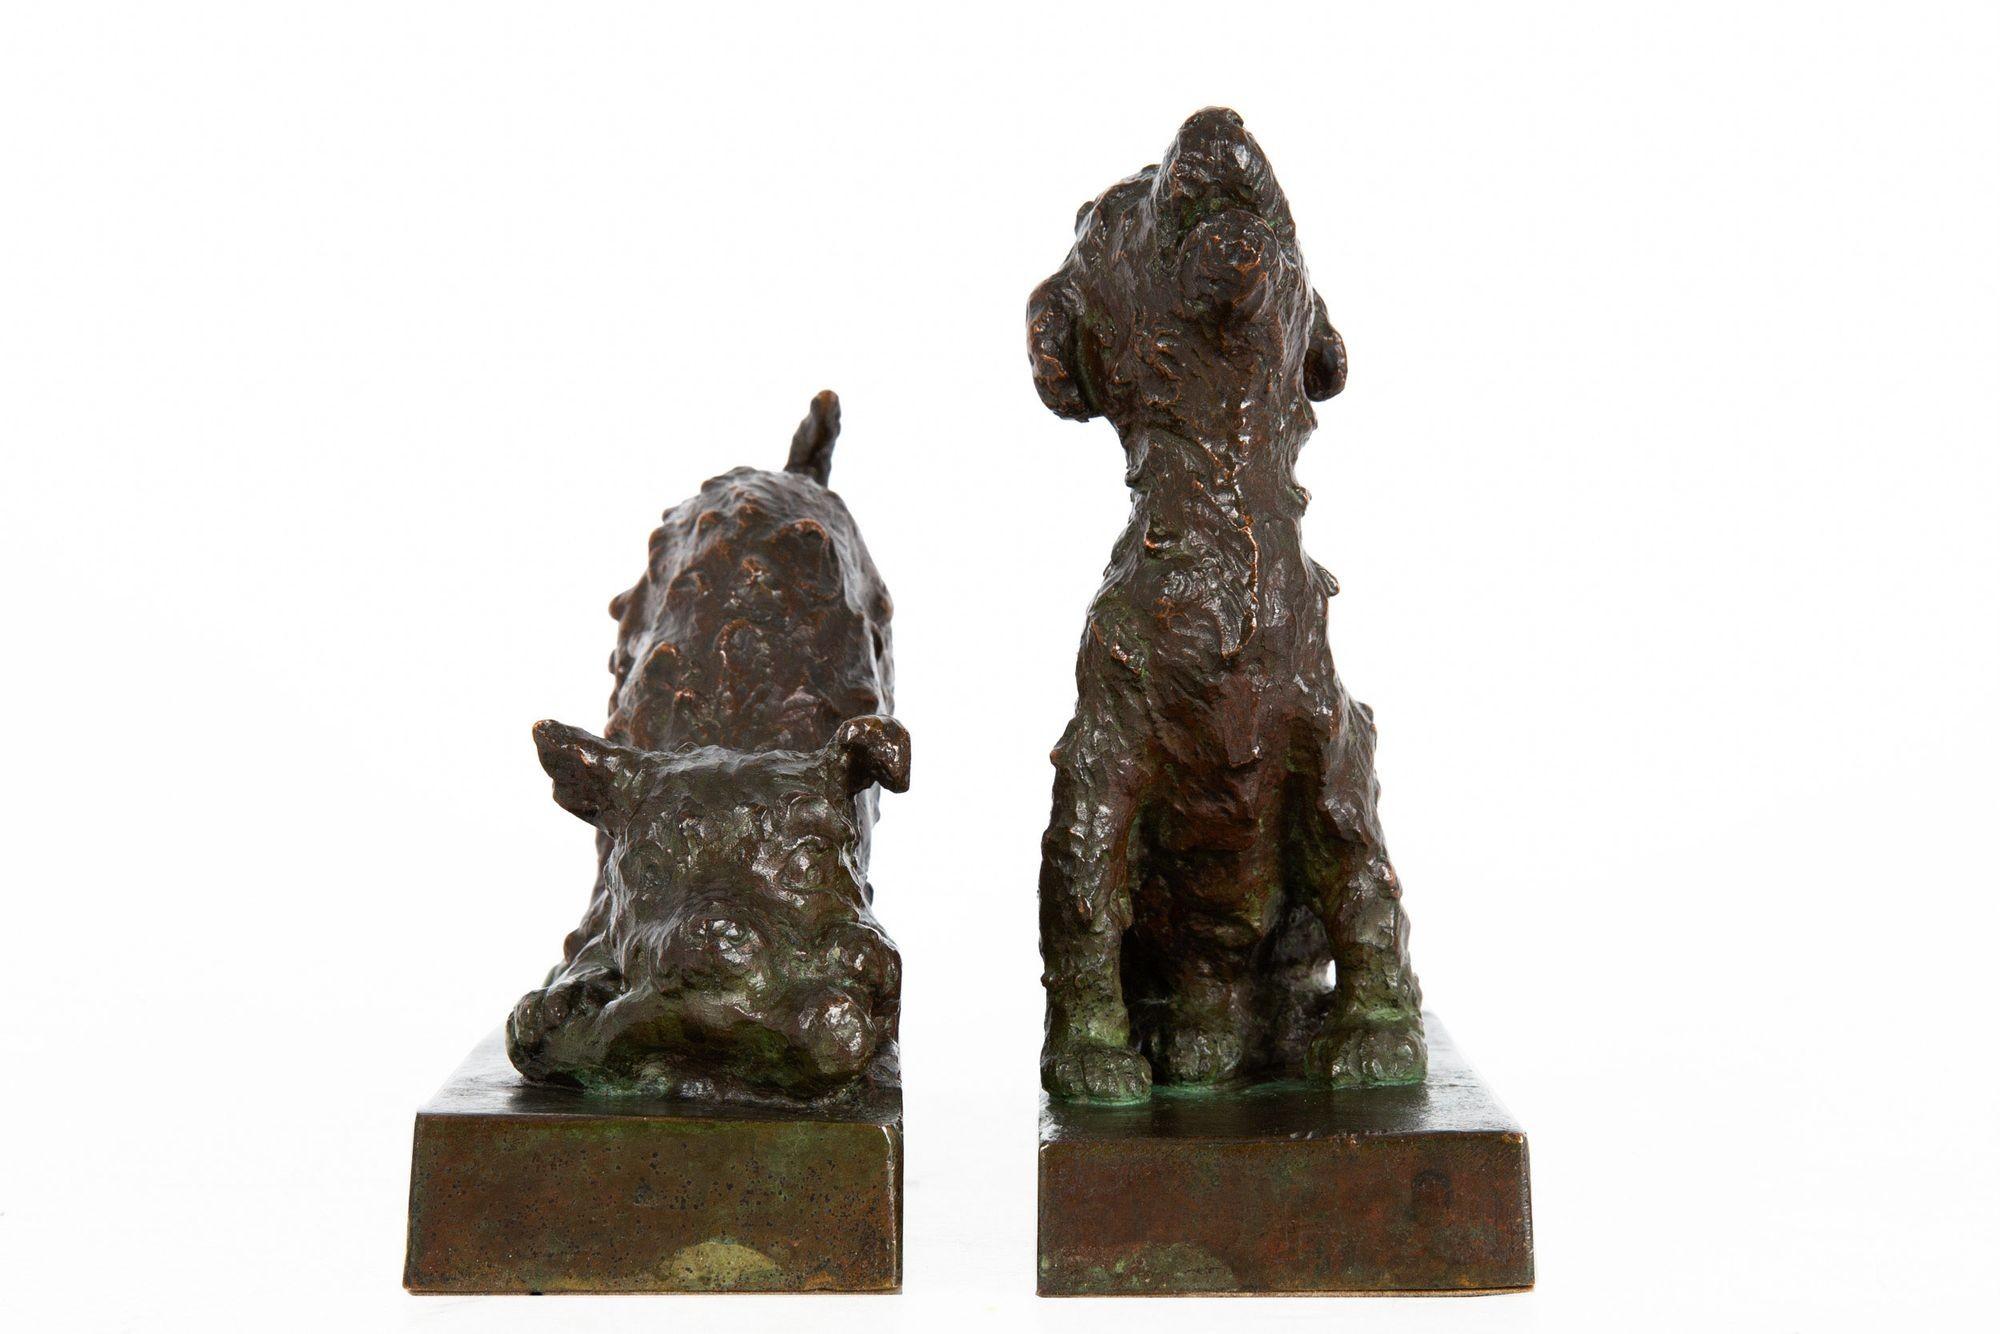 Art Deco Rare Pair of “Terriers” Bookends Bronze Sculpture by Edith Baretto Parsons For Sale